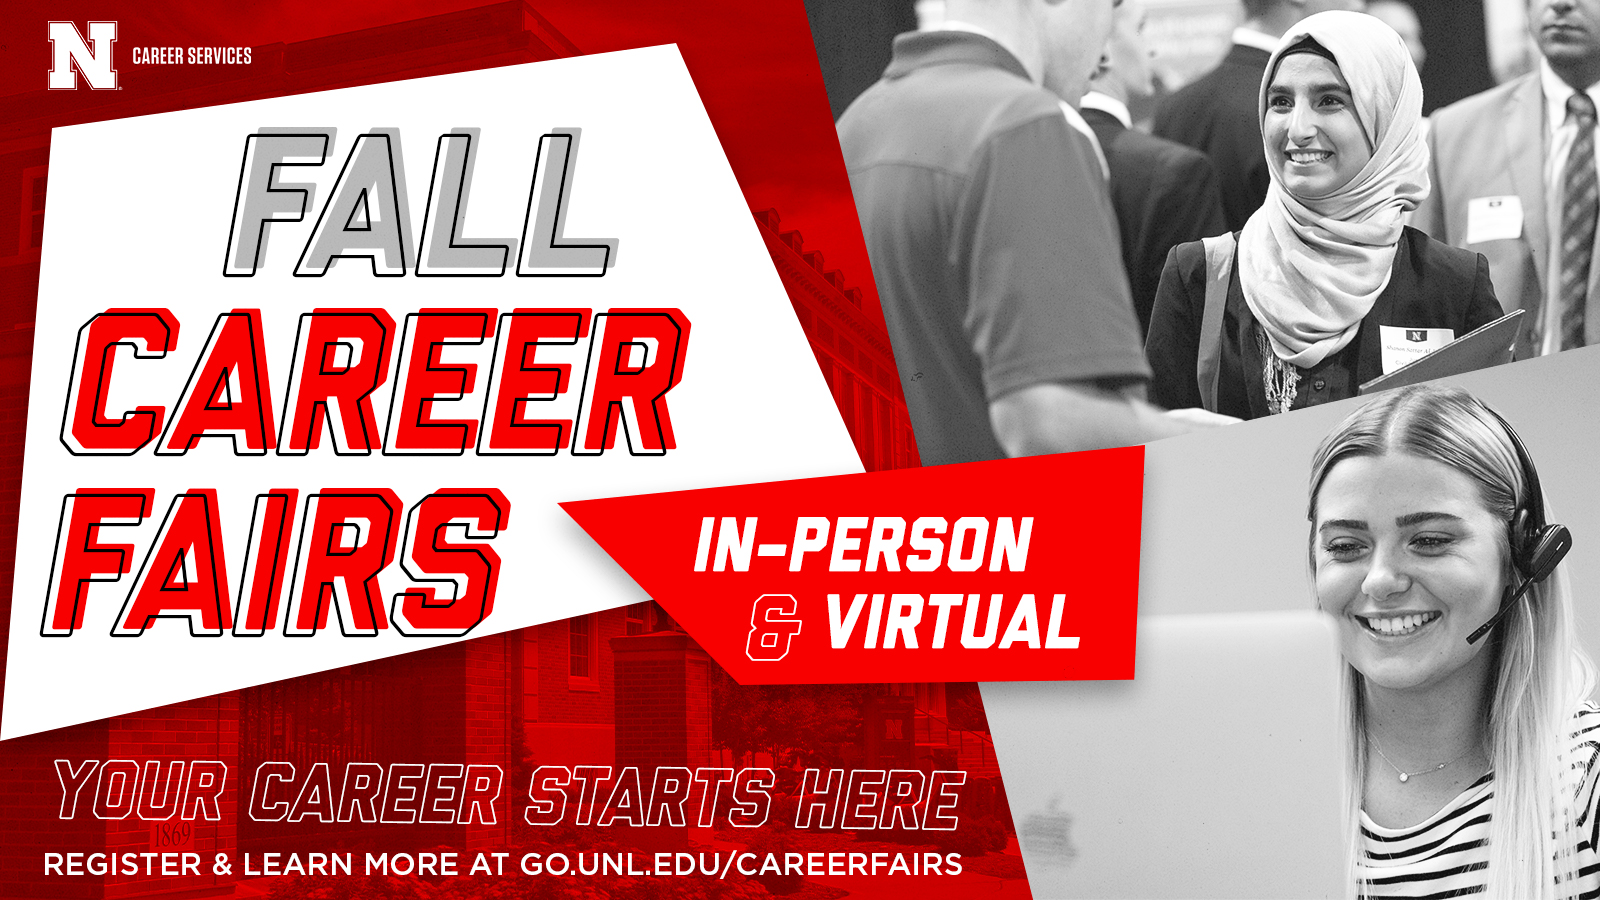 Meet employers with internship and full-time opportunities at the Fall Career Fairs!